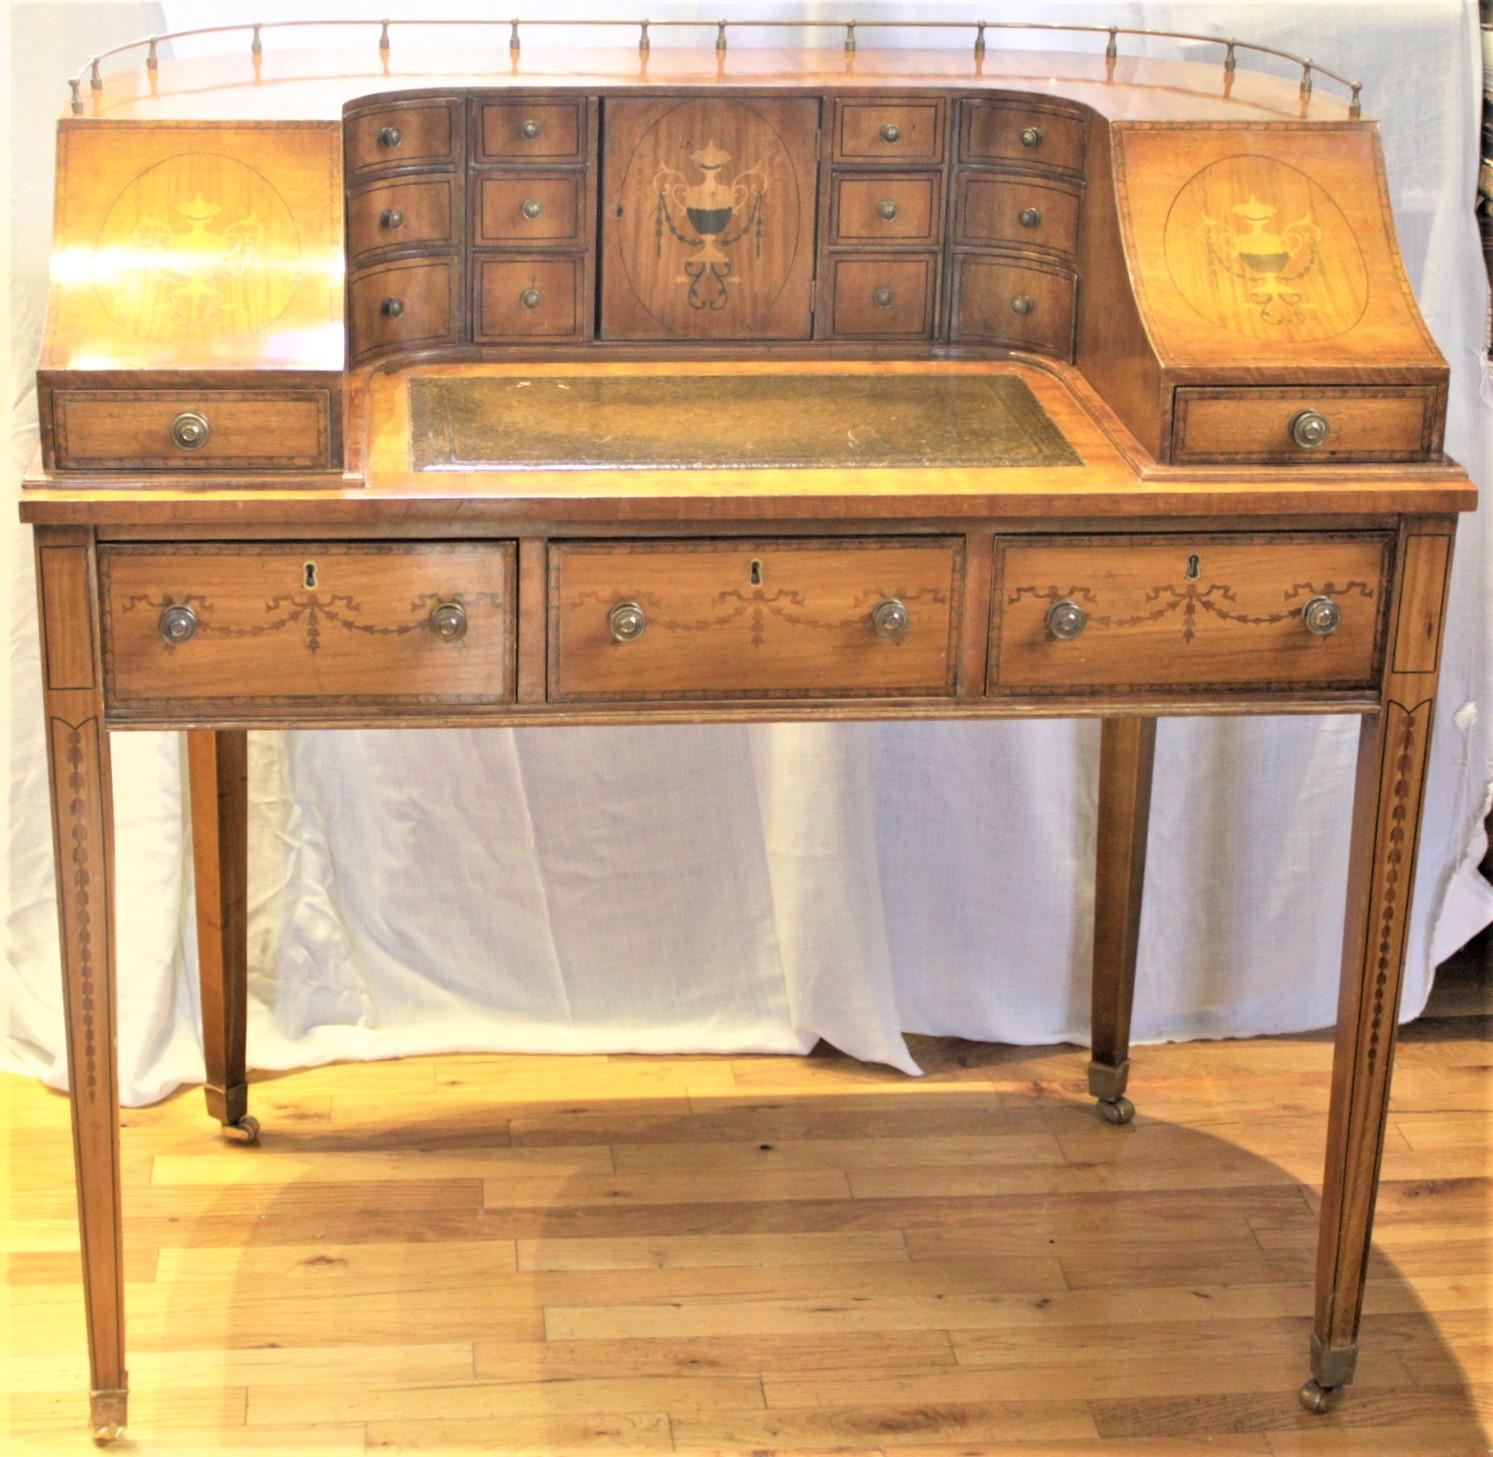 Hand-Crafted Antique English Carlton House Desk with Marquetry & Brass Accents For Sale